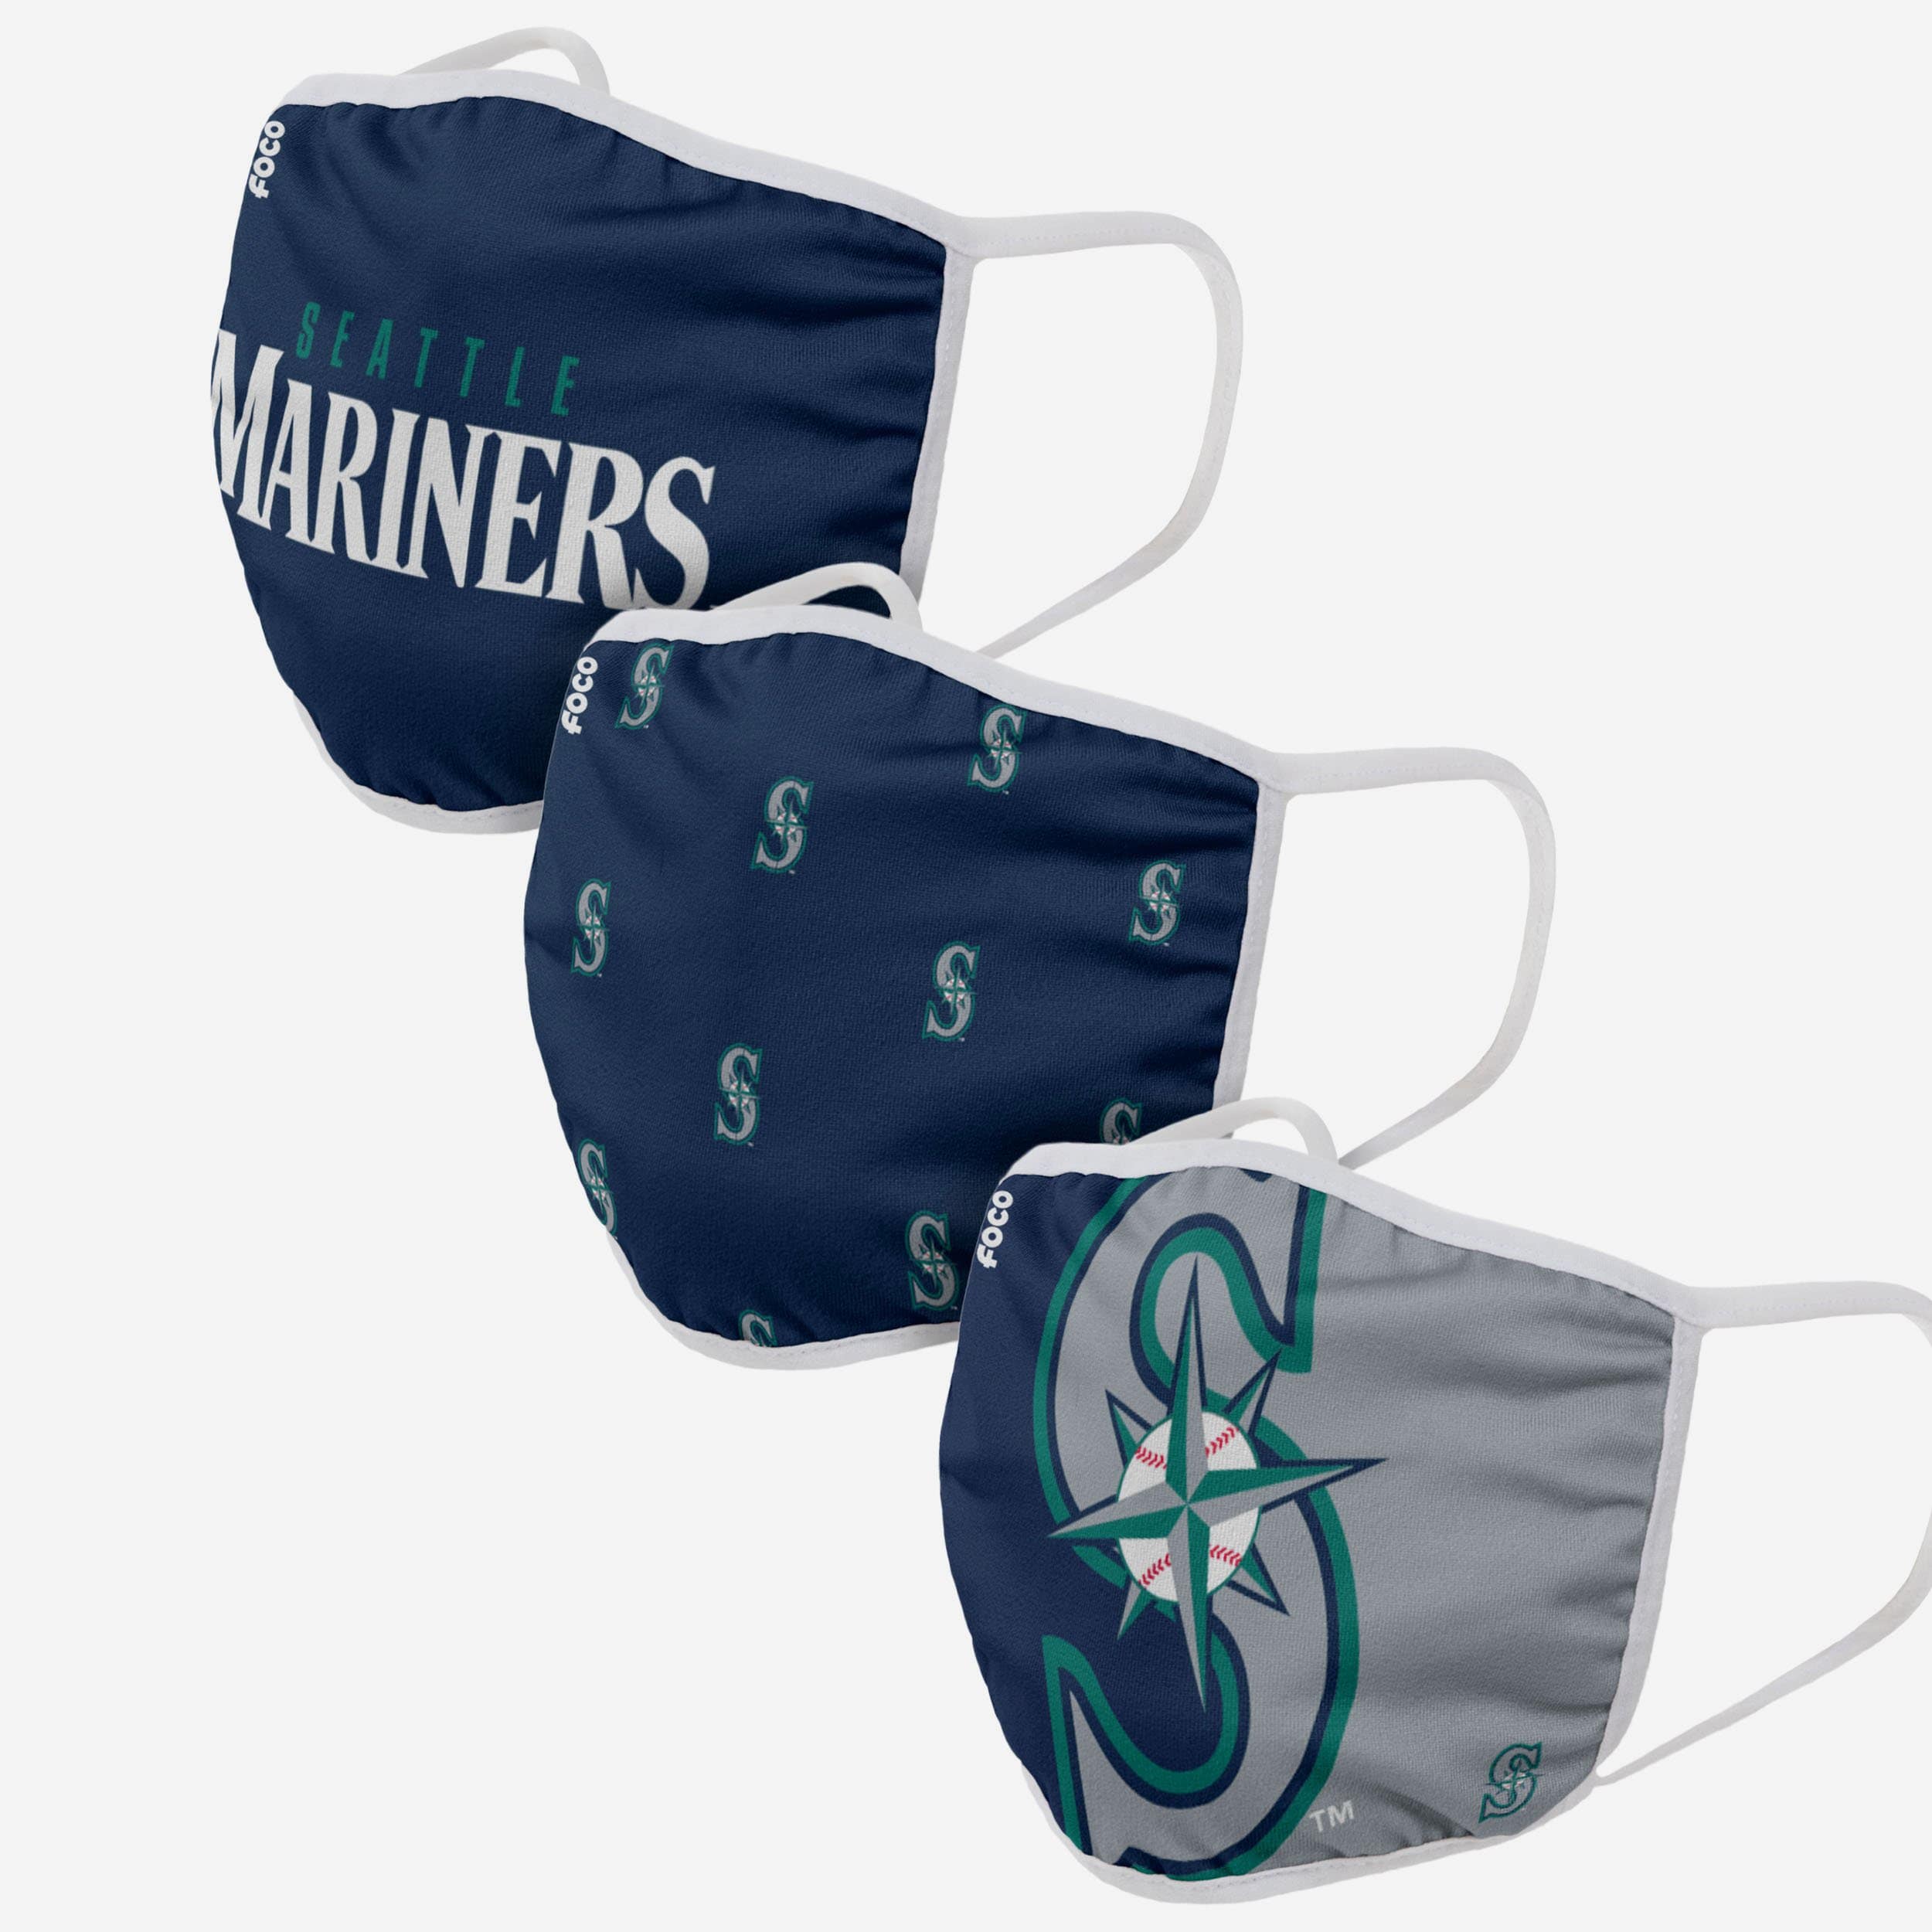 SEATTLE MARINERS, Connecticut Fashion and Lifestyle Blog